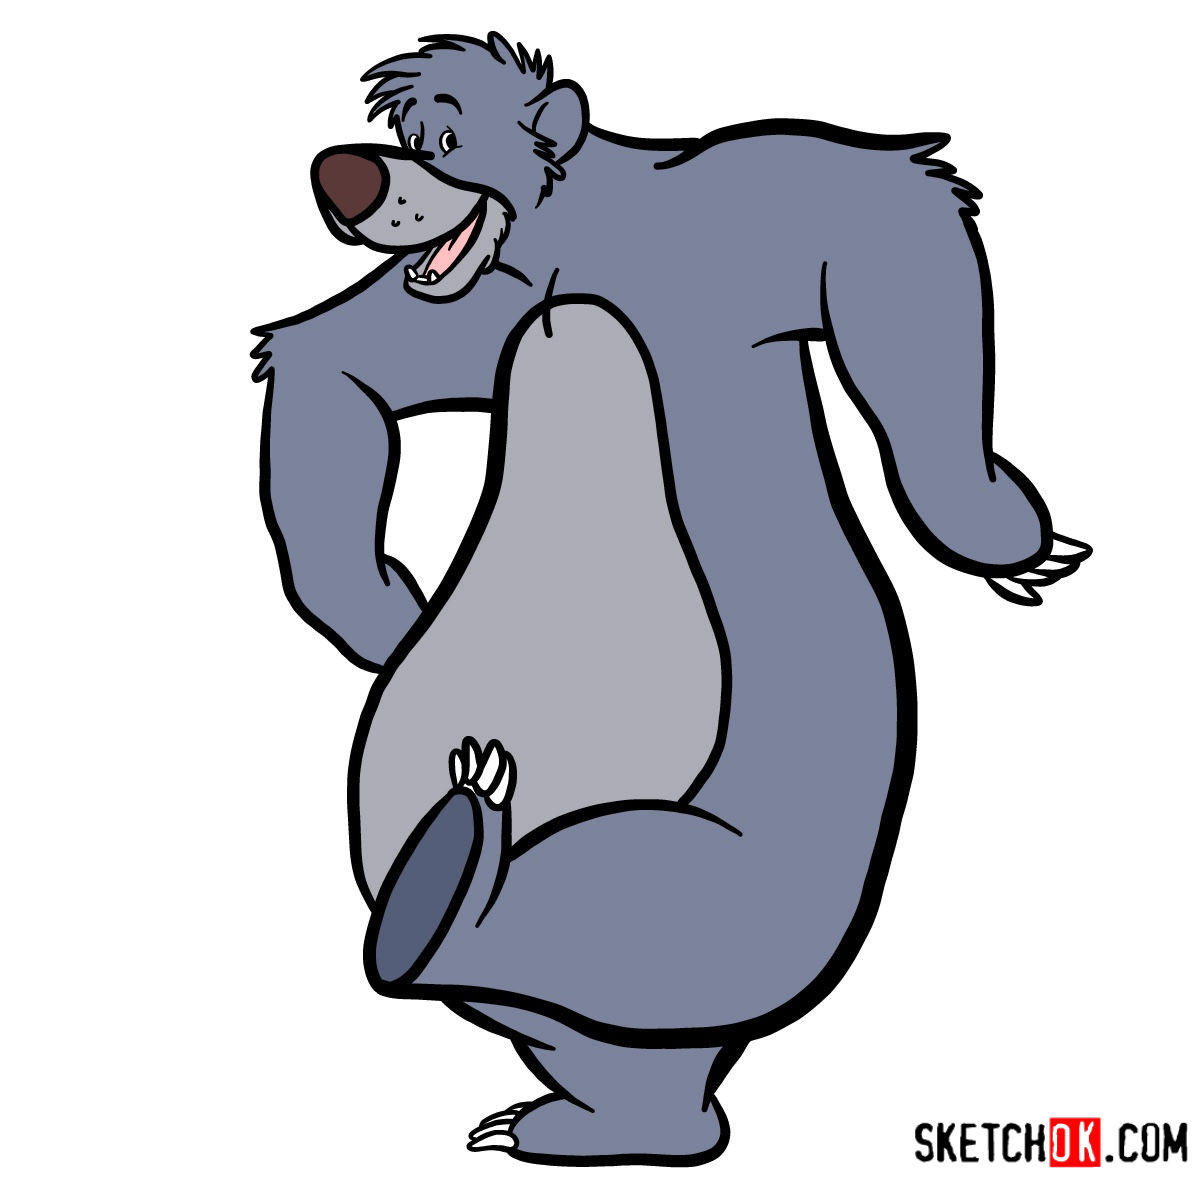 How To Draw Baloo From The Jungle Book Sketchok Easy Drawing Guides